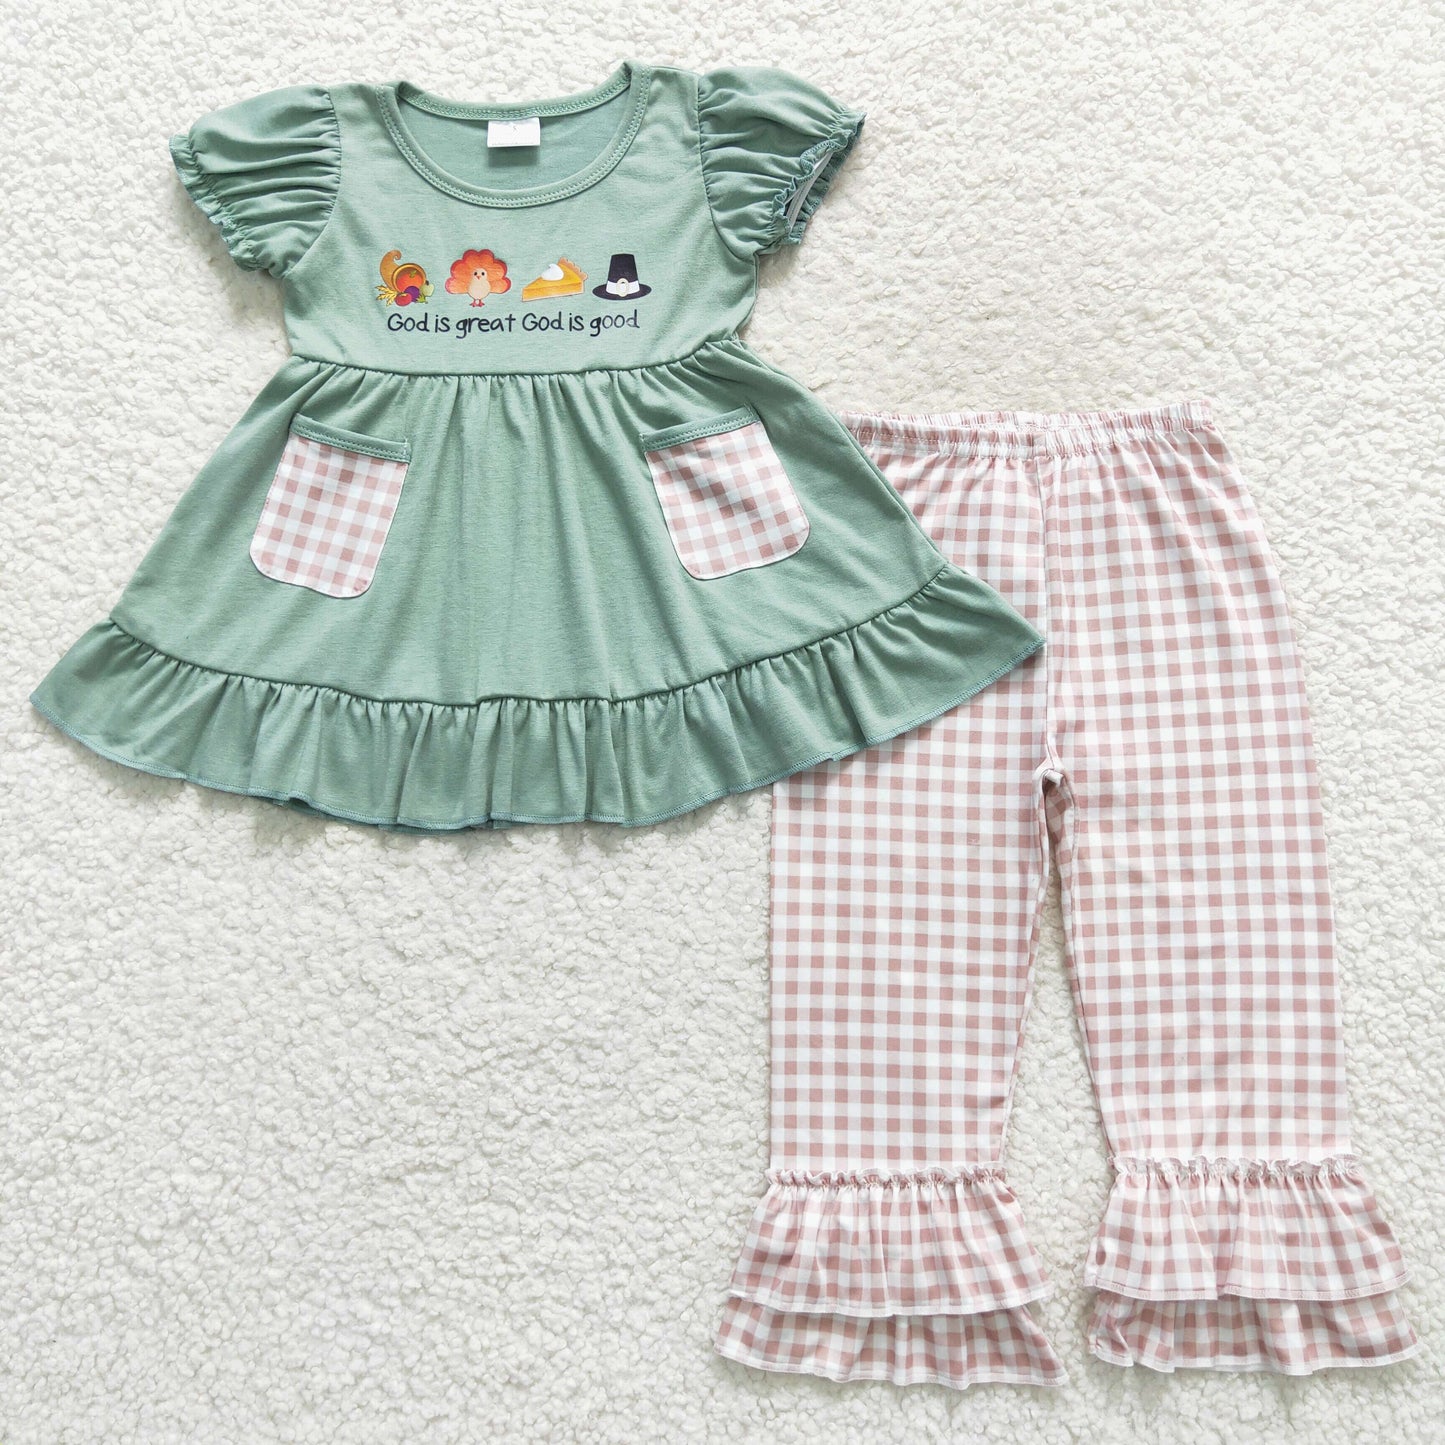 god is great god is good toddler girl thanksgiving day outfit